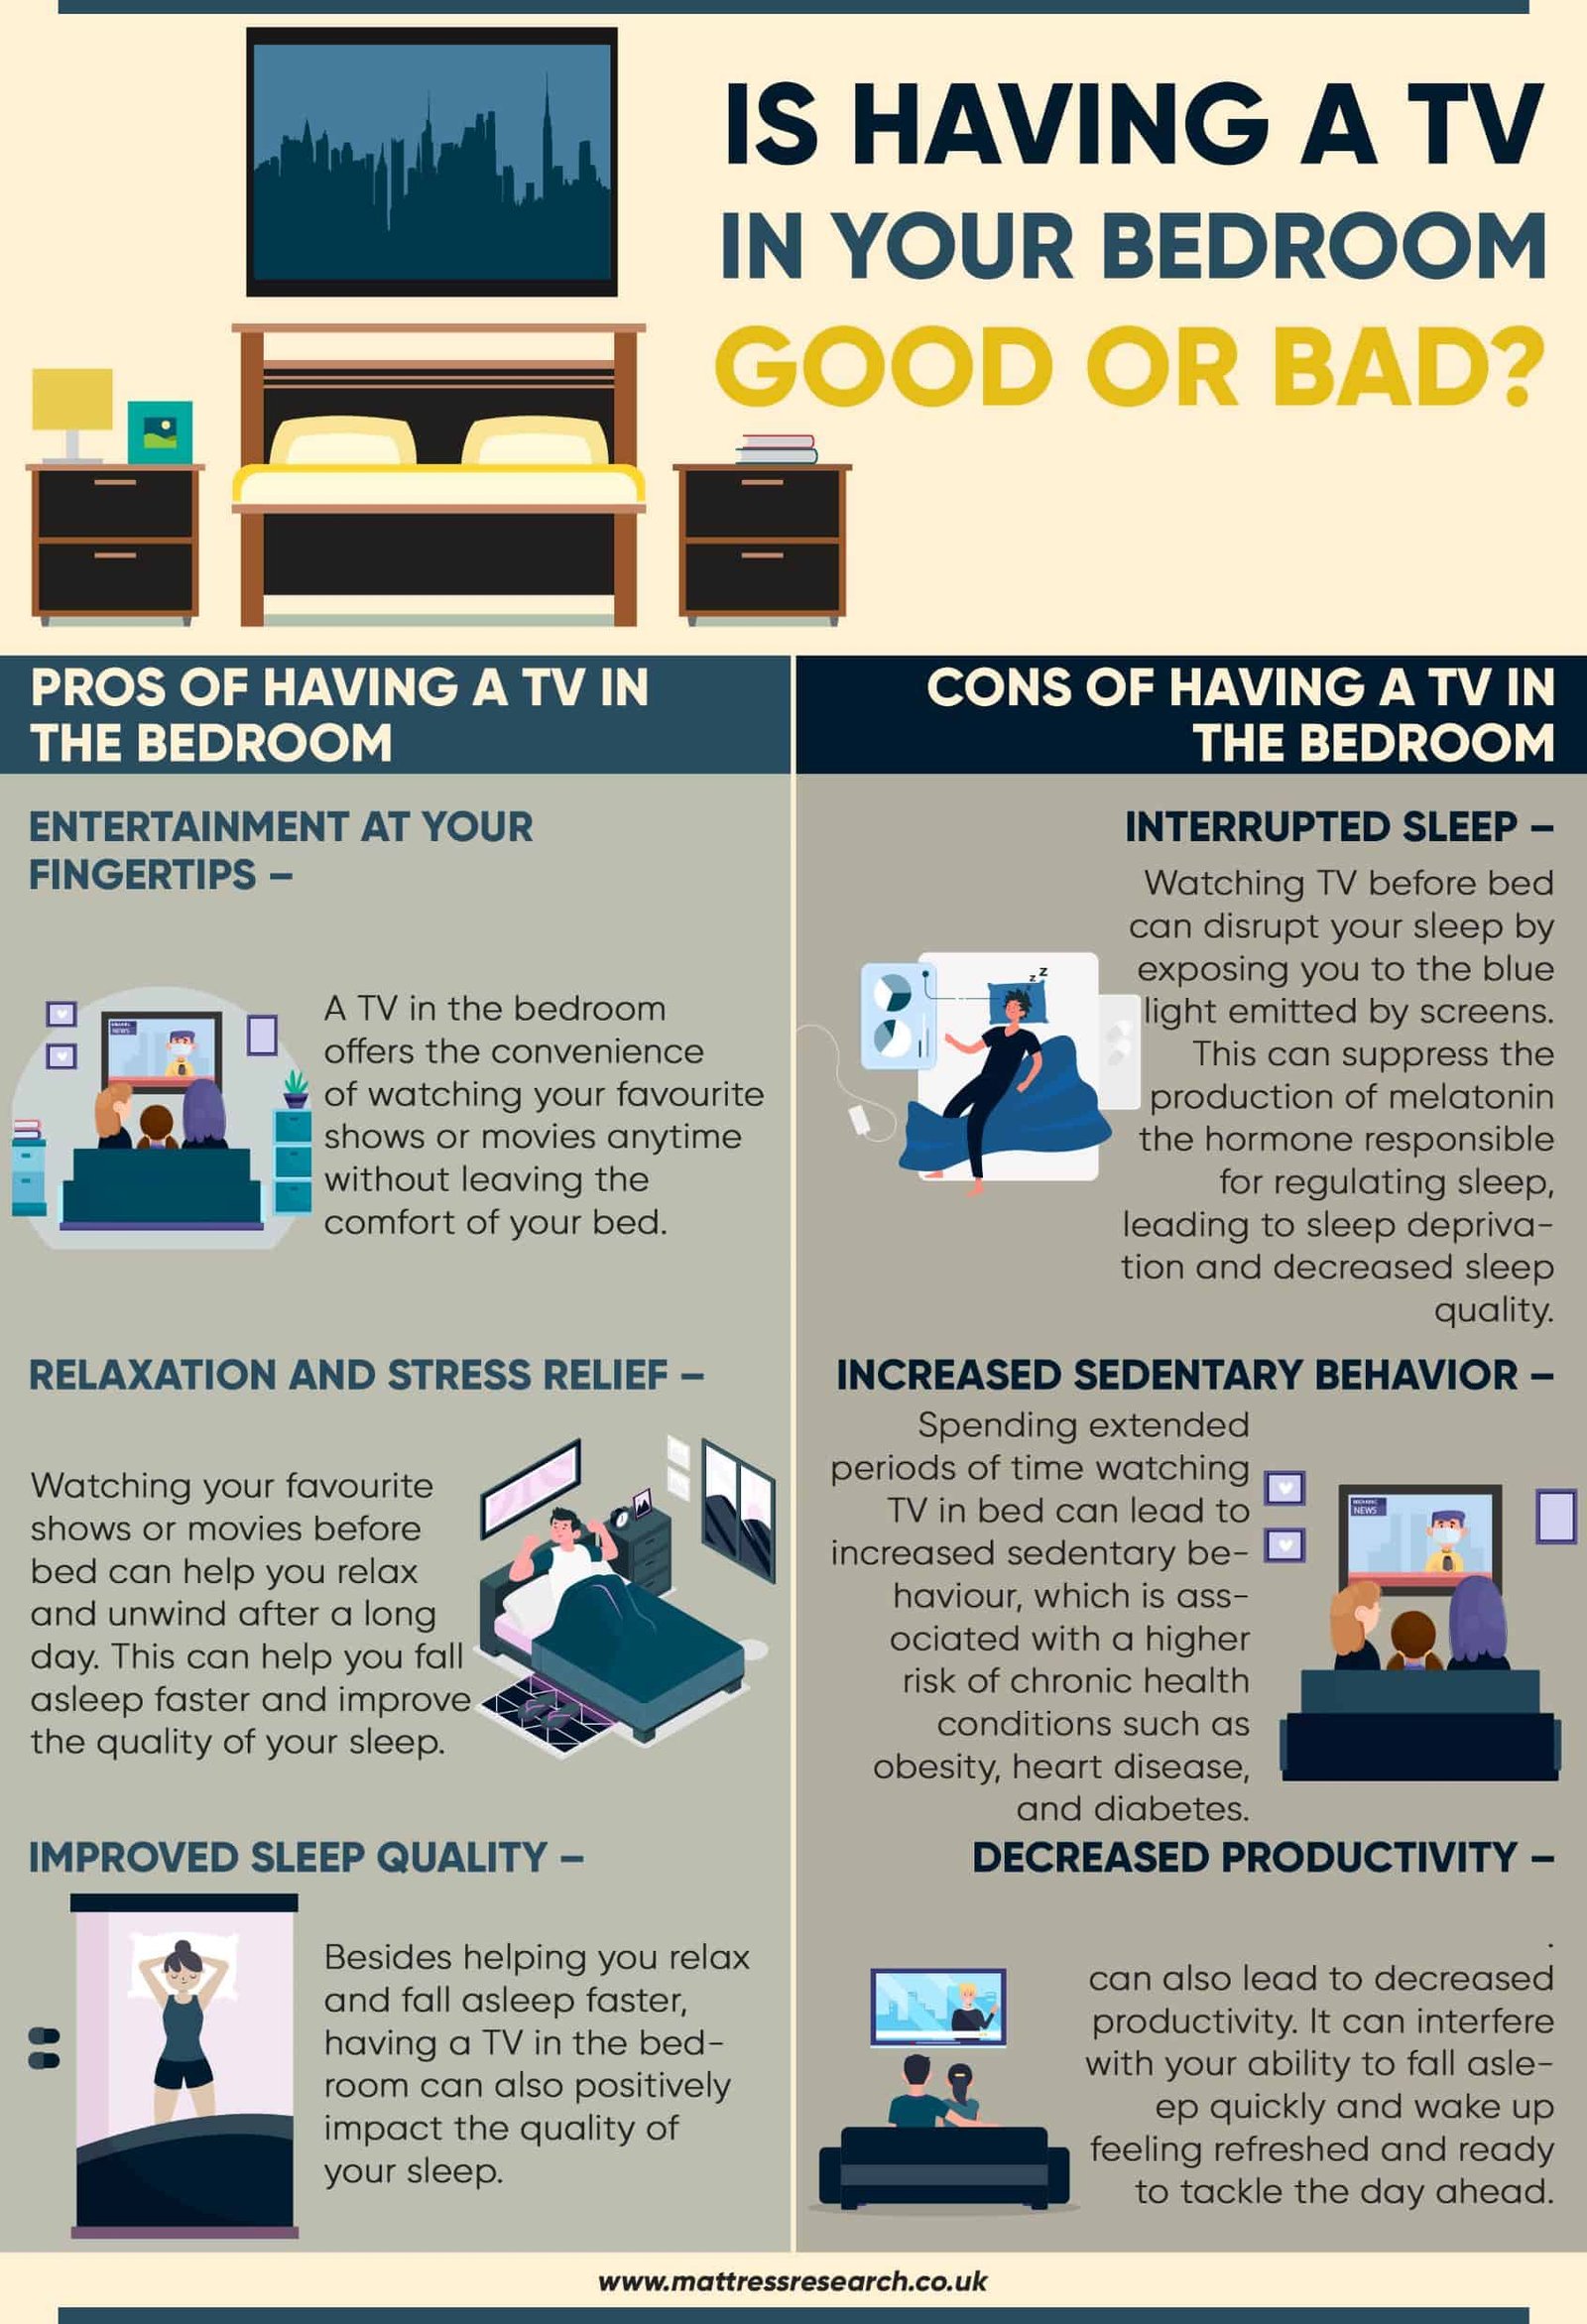 Is having a TV in your bedroom good or bad?